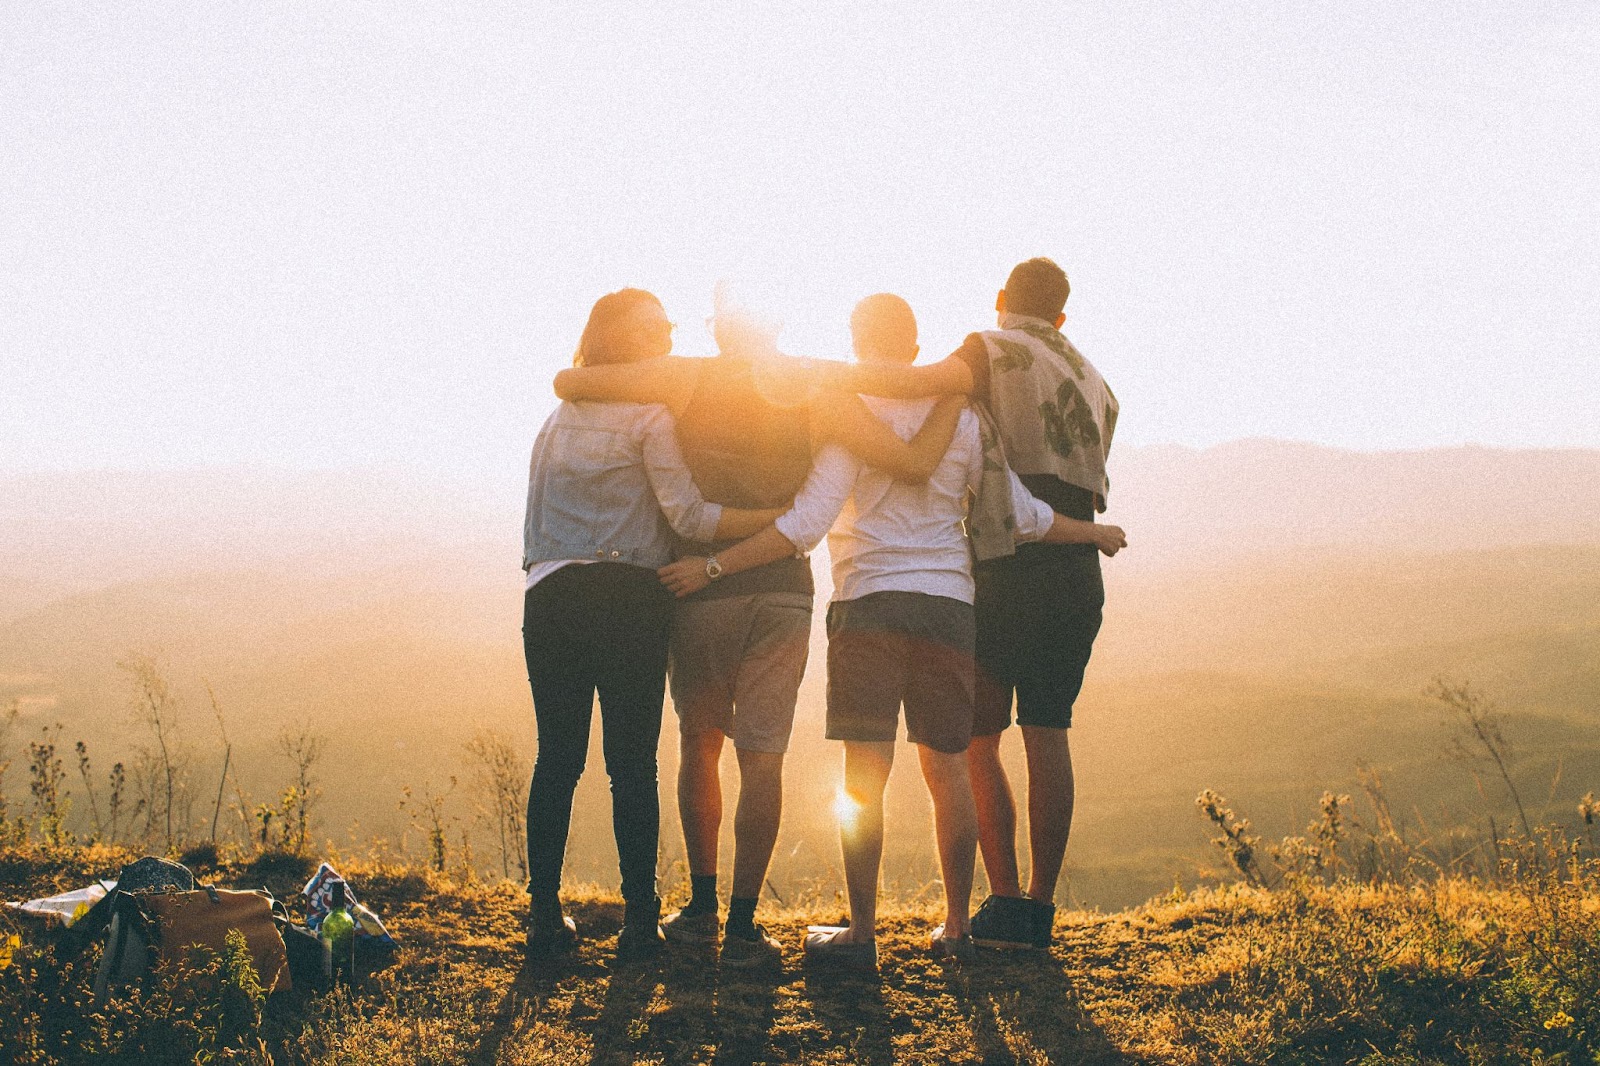 four friends with their arms around one another, watching a sunset with mountains in the background